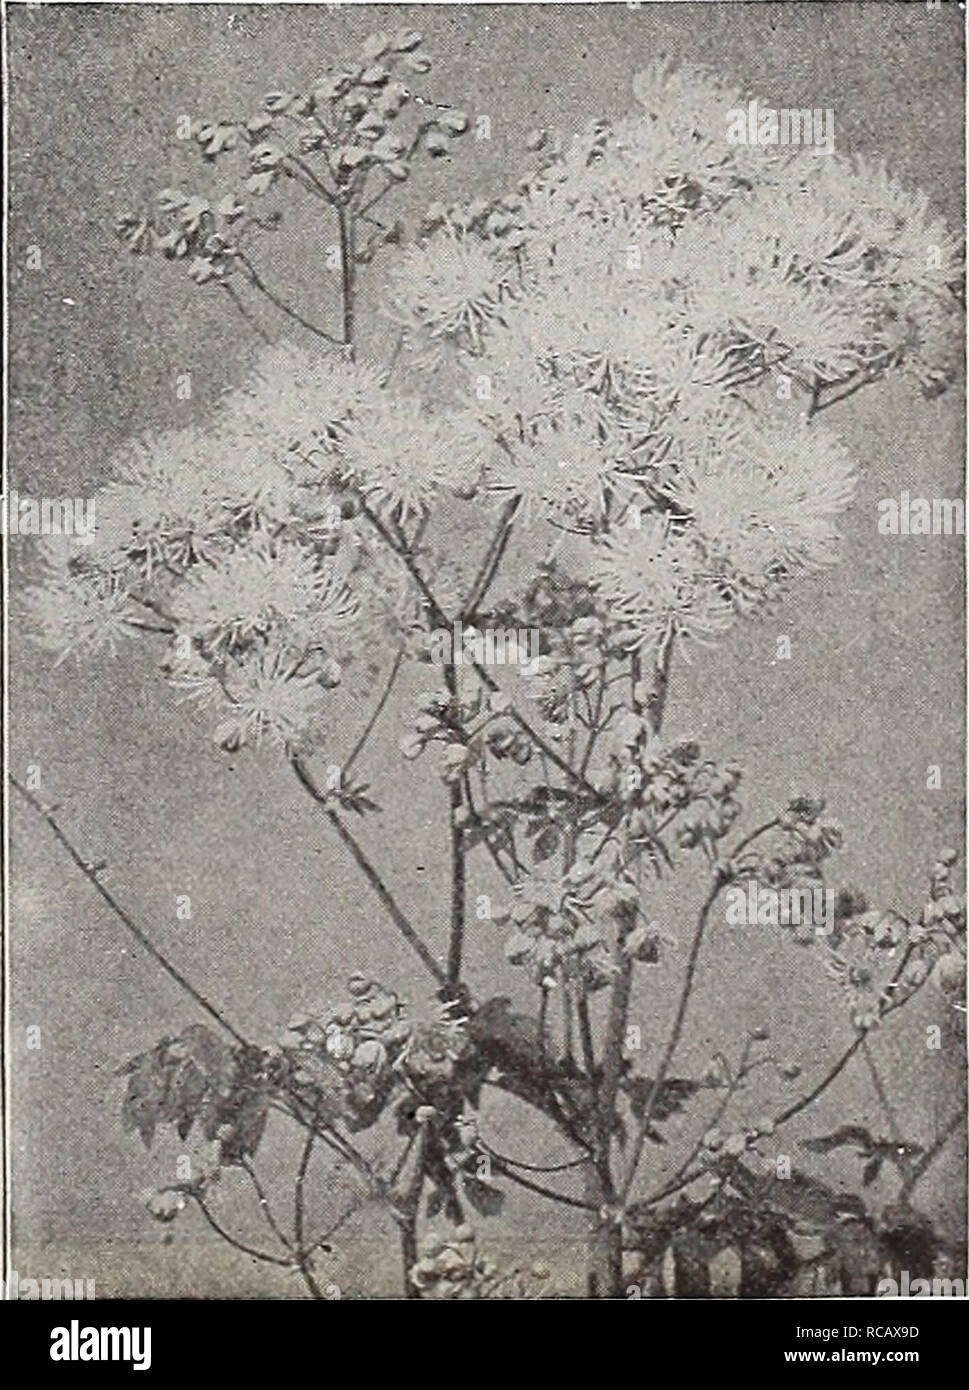 . Dreer's garden book : seventy-third annual edition 1911. Seeds Catalogs; Nursery stock Catalogs; Gardening Equipment and supplies Catalogs; Flowers Seeds Catalogs; Vegetables Seeds Catalogs; Fruit Seeds Catalogs. lUMADREER -PnilADELPHIA^lif HARDY PEREMM1AL PbANIS • Jl 241 ^jfiBfe.. fl 1 J w r^&quot; &gt;Si rHHH / vj SapHfed B9KL i.r '-'J&amp;fa JL Trollius (Globe Flower). TANACETUM. Balsamita {Costmary, or Bible Leaf), An old-time favorite, growing about 4 feet high and bearing small yellow flowers; in by-gone days the ladies used the fragrant leaves as bookmarks, hence one of its common n Stock Photo